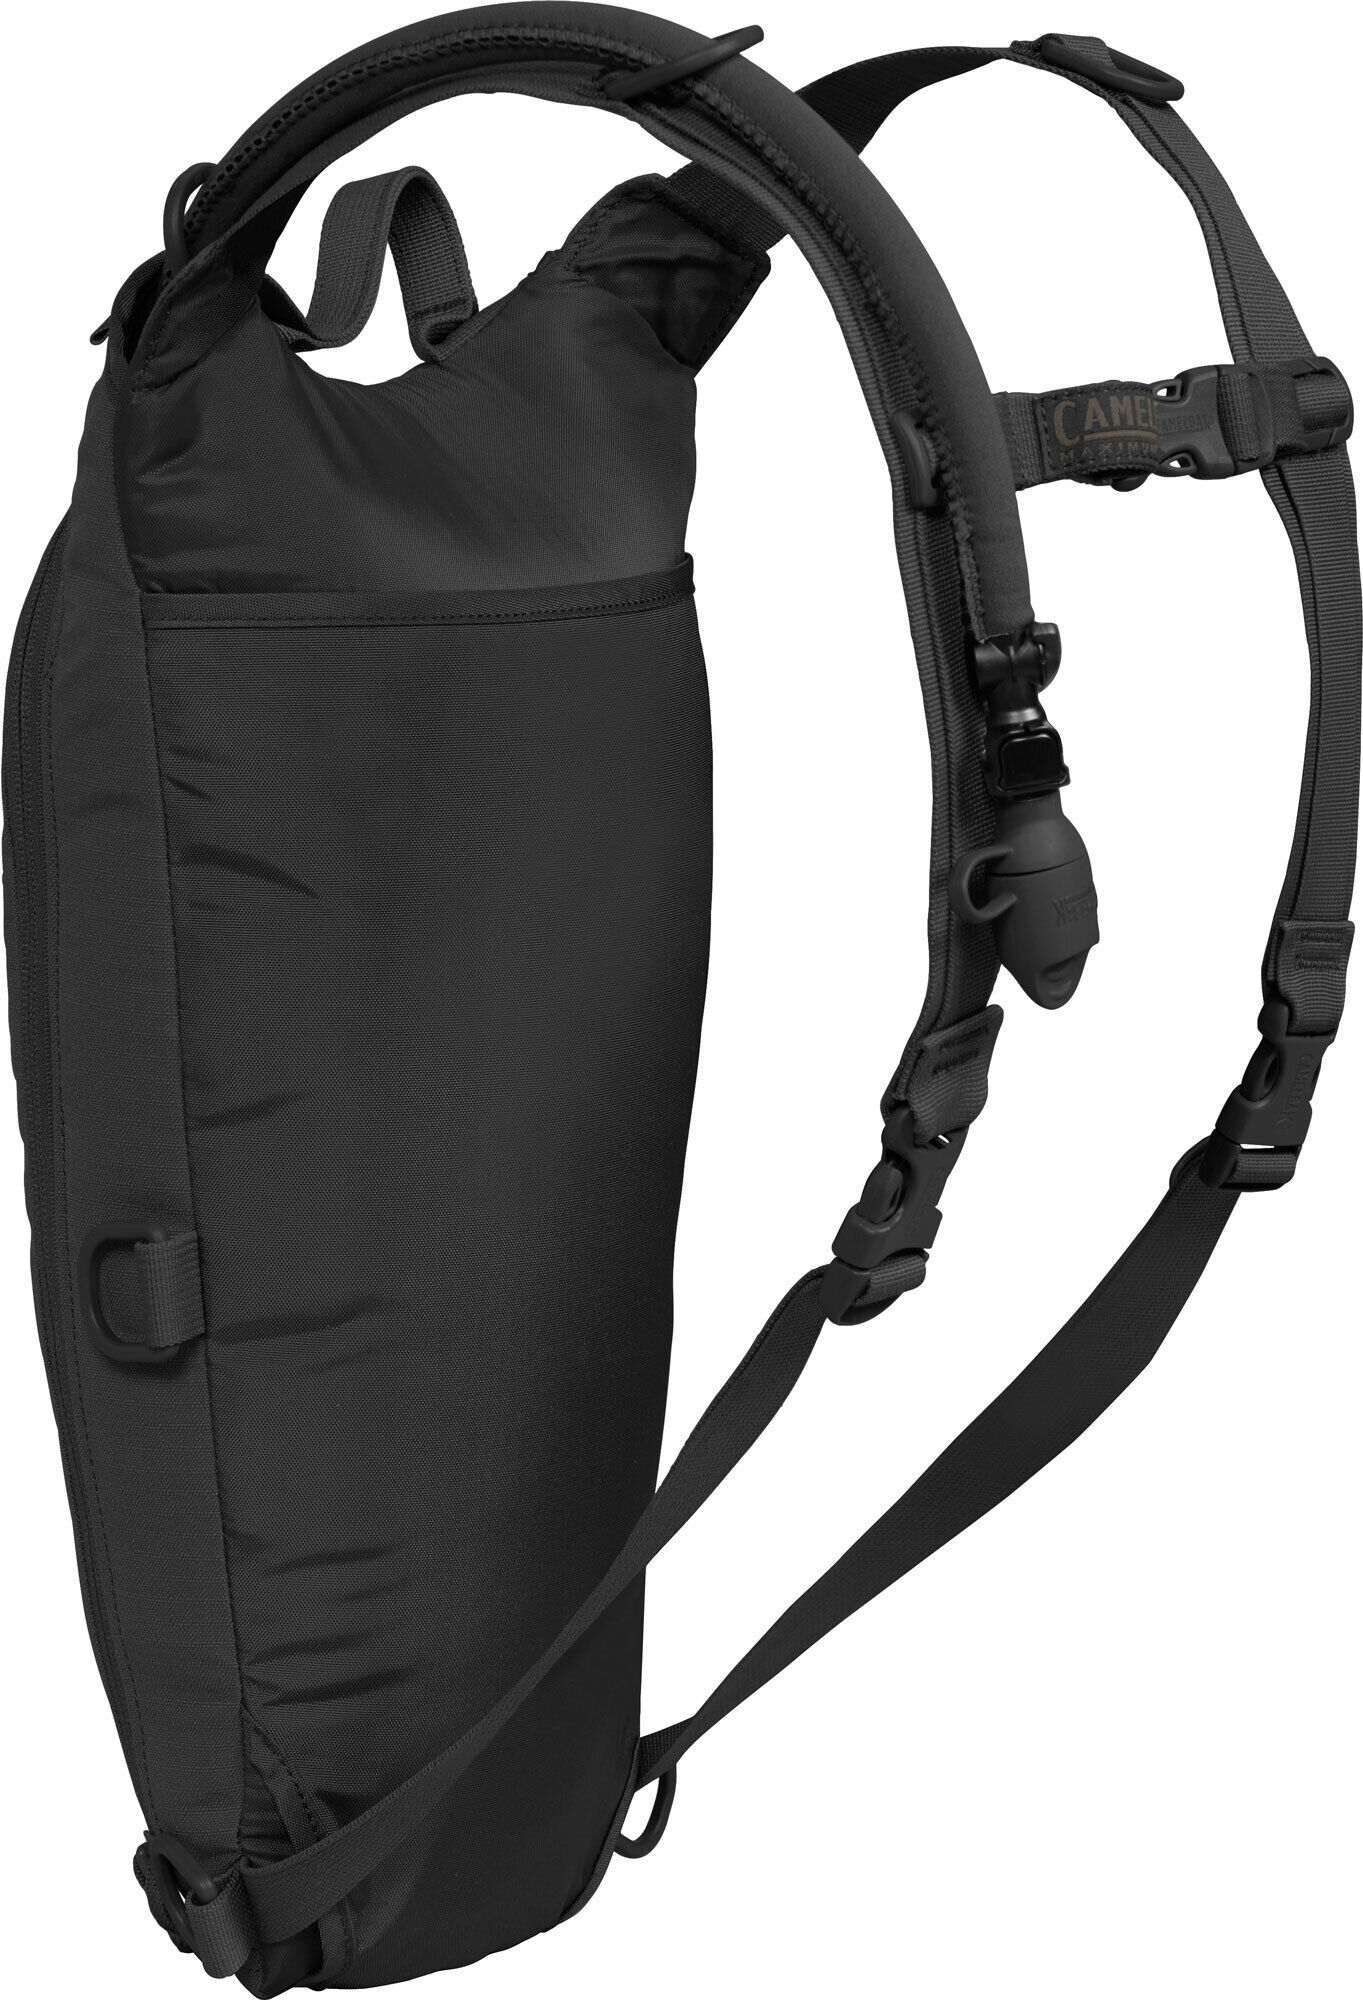 Camelbak 3 Litre Thermobak Hydration Pack 100oz Black & Coyote Free Web Doms 